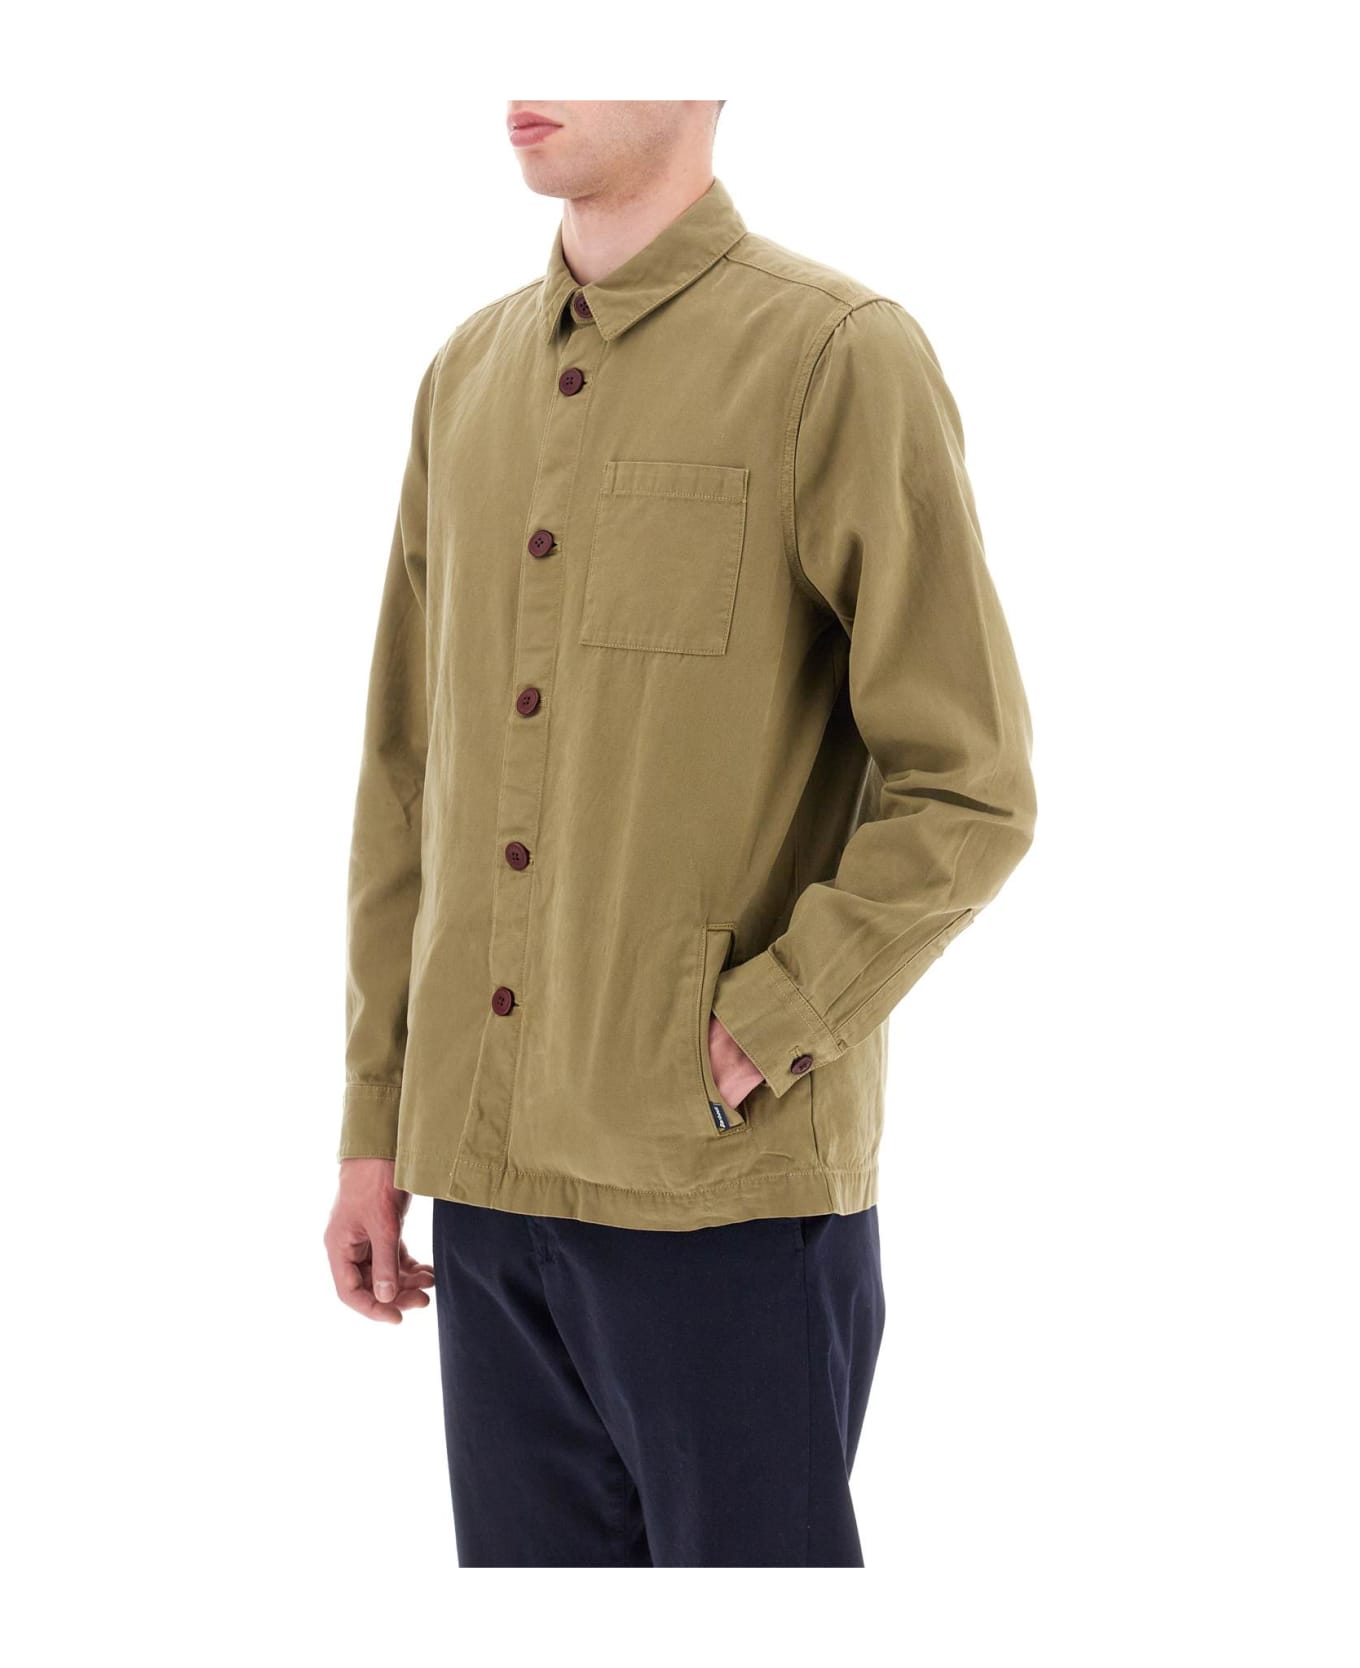 Barbour Green Cotton Shirt - BLEACHED OLIVE (Green)